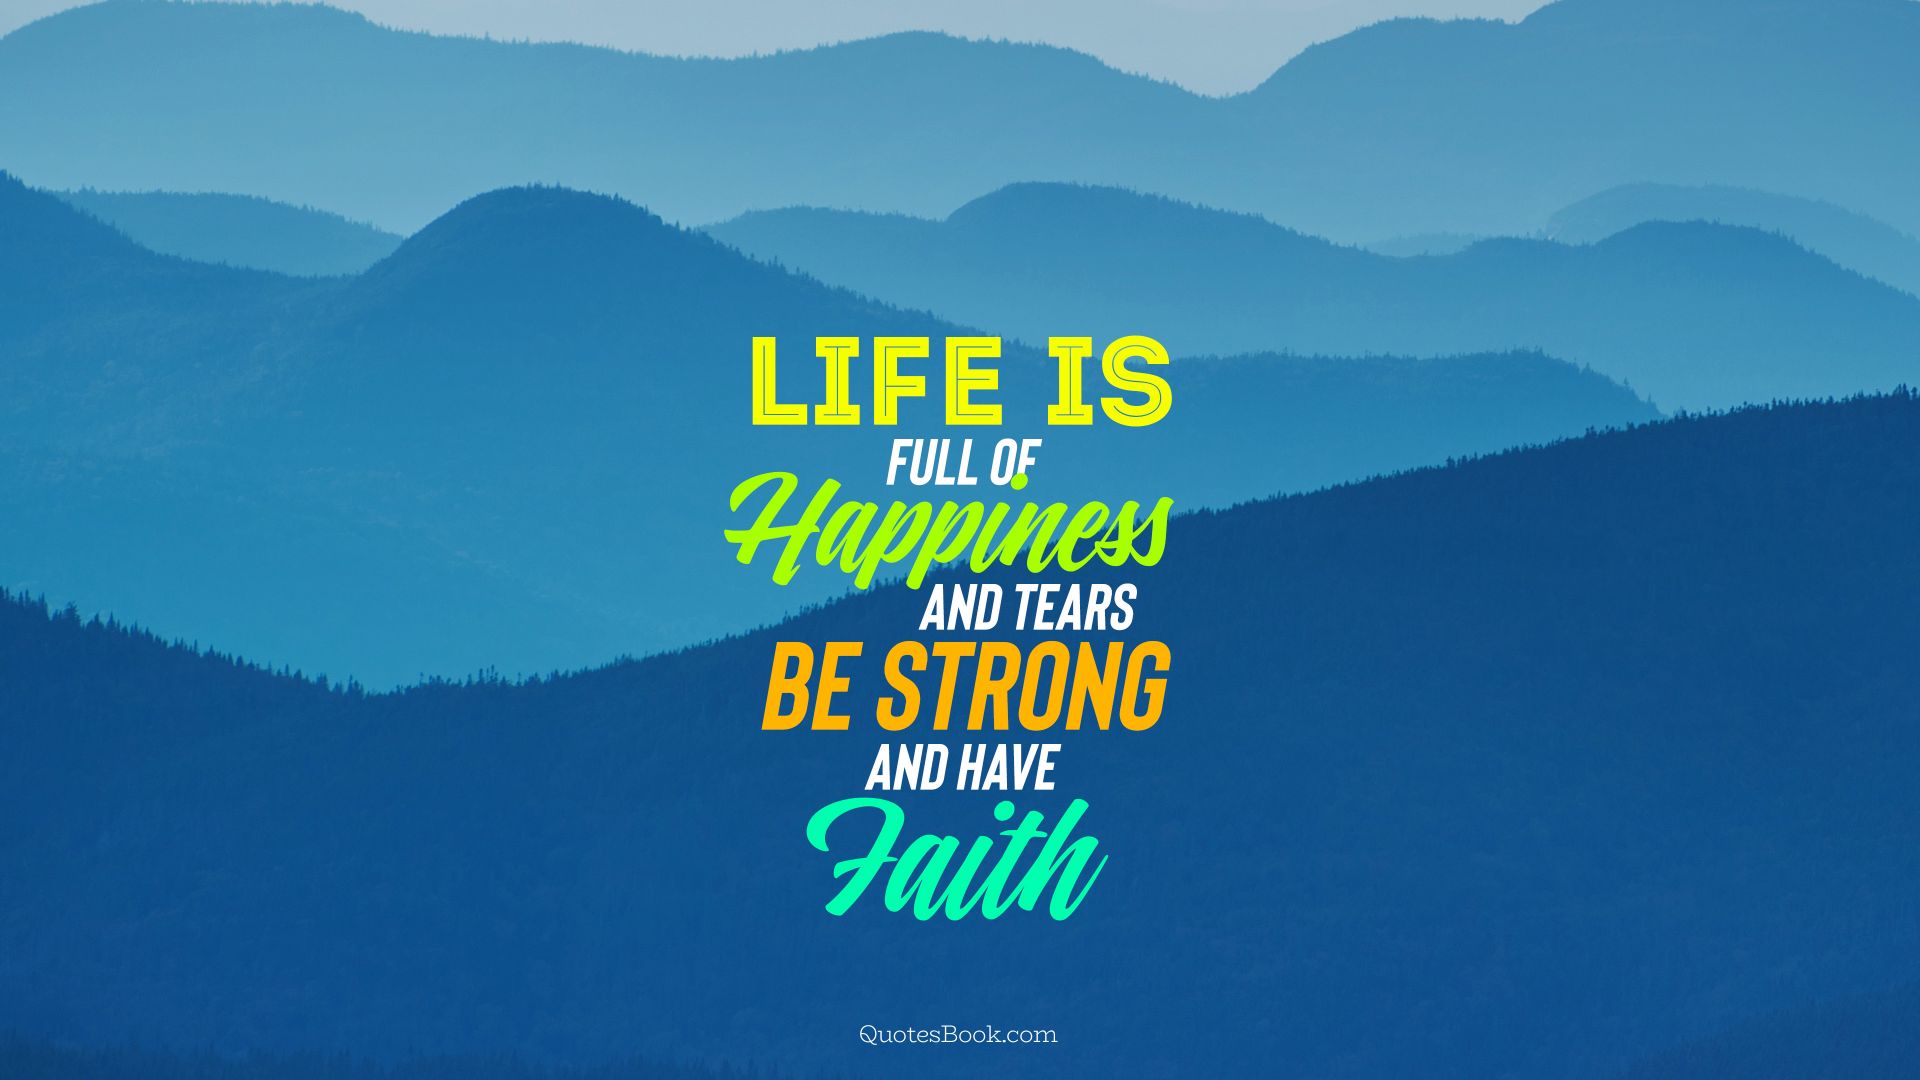 Life is full of happiness and tears be strong and have faith